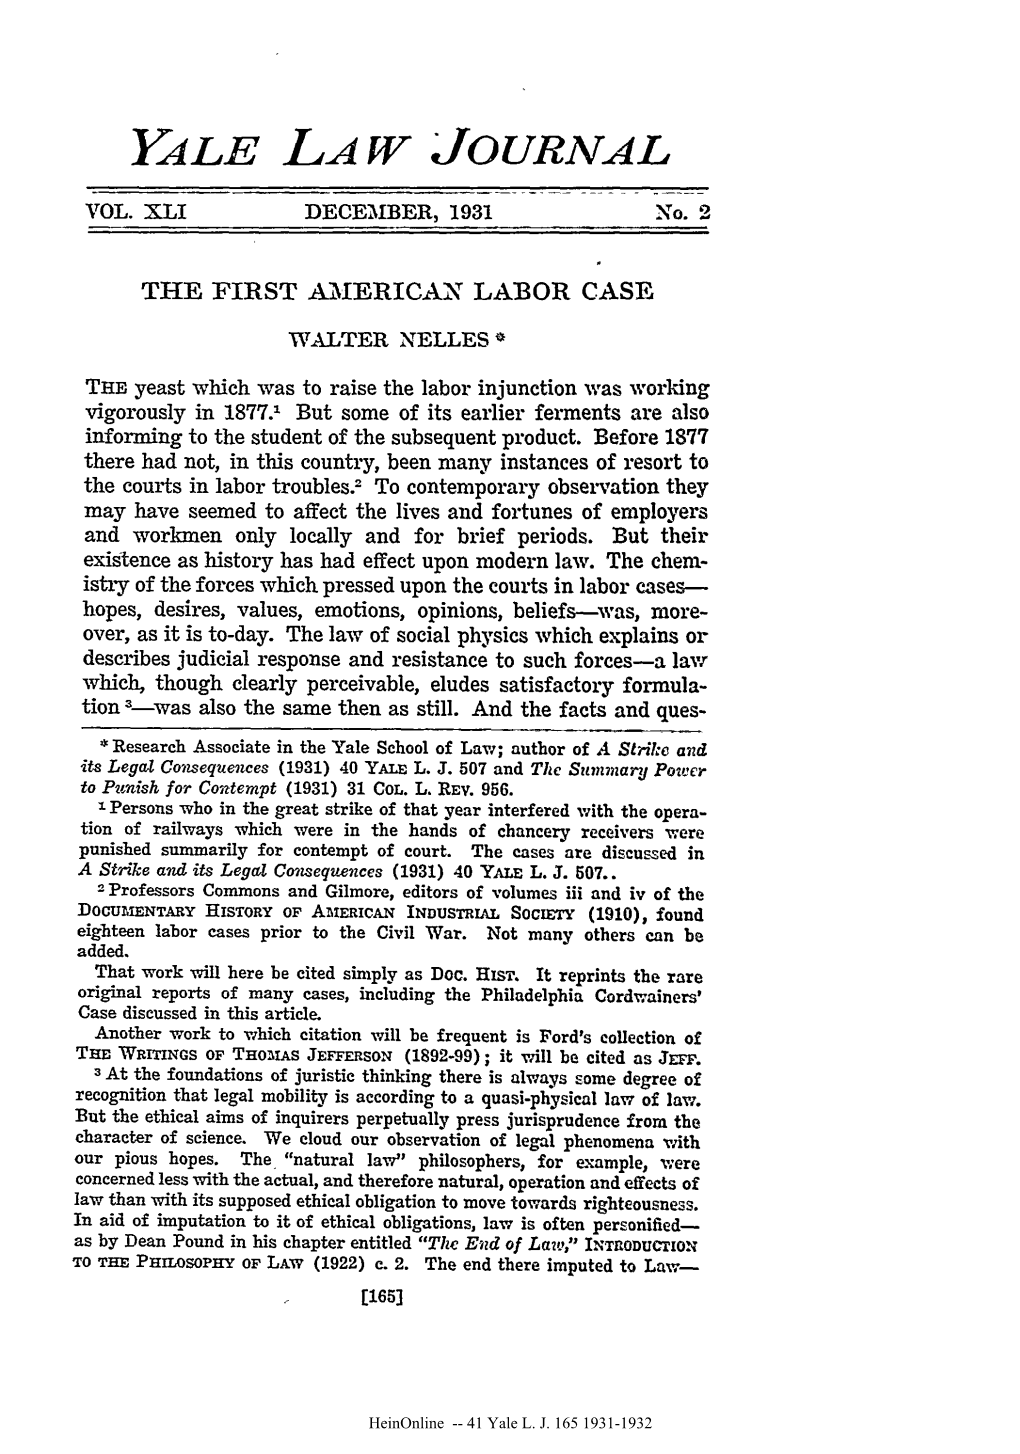 The First American Labor Case